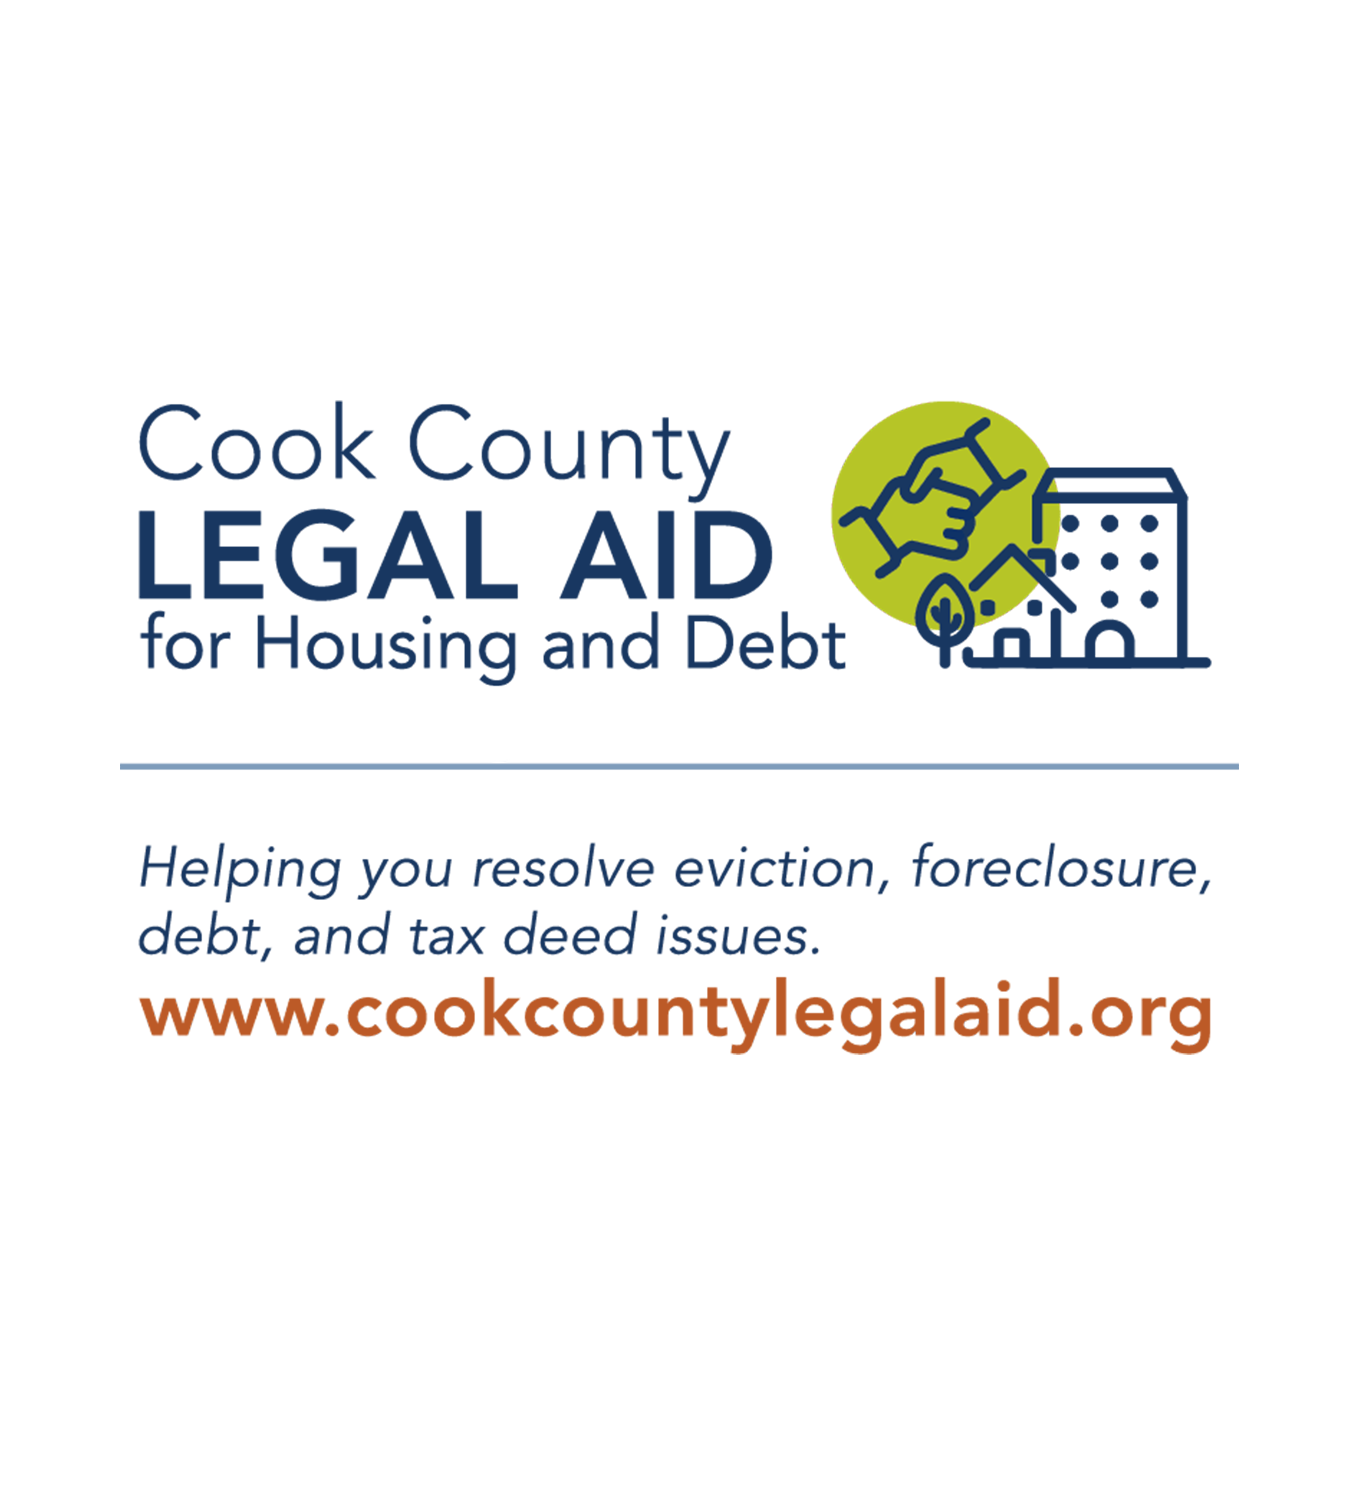 Cook County Legal Aid for Housing & Debt Township of Lyons